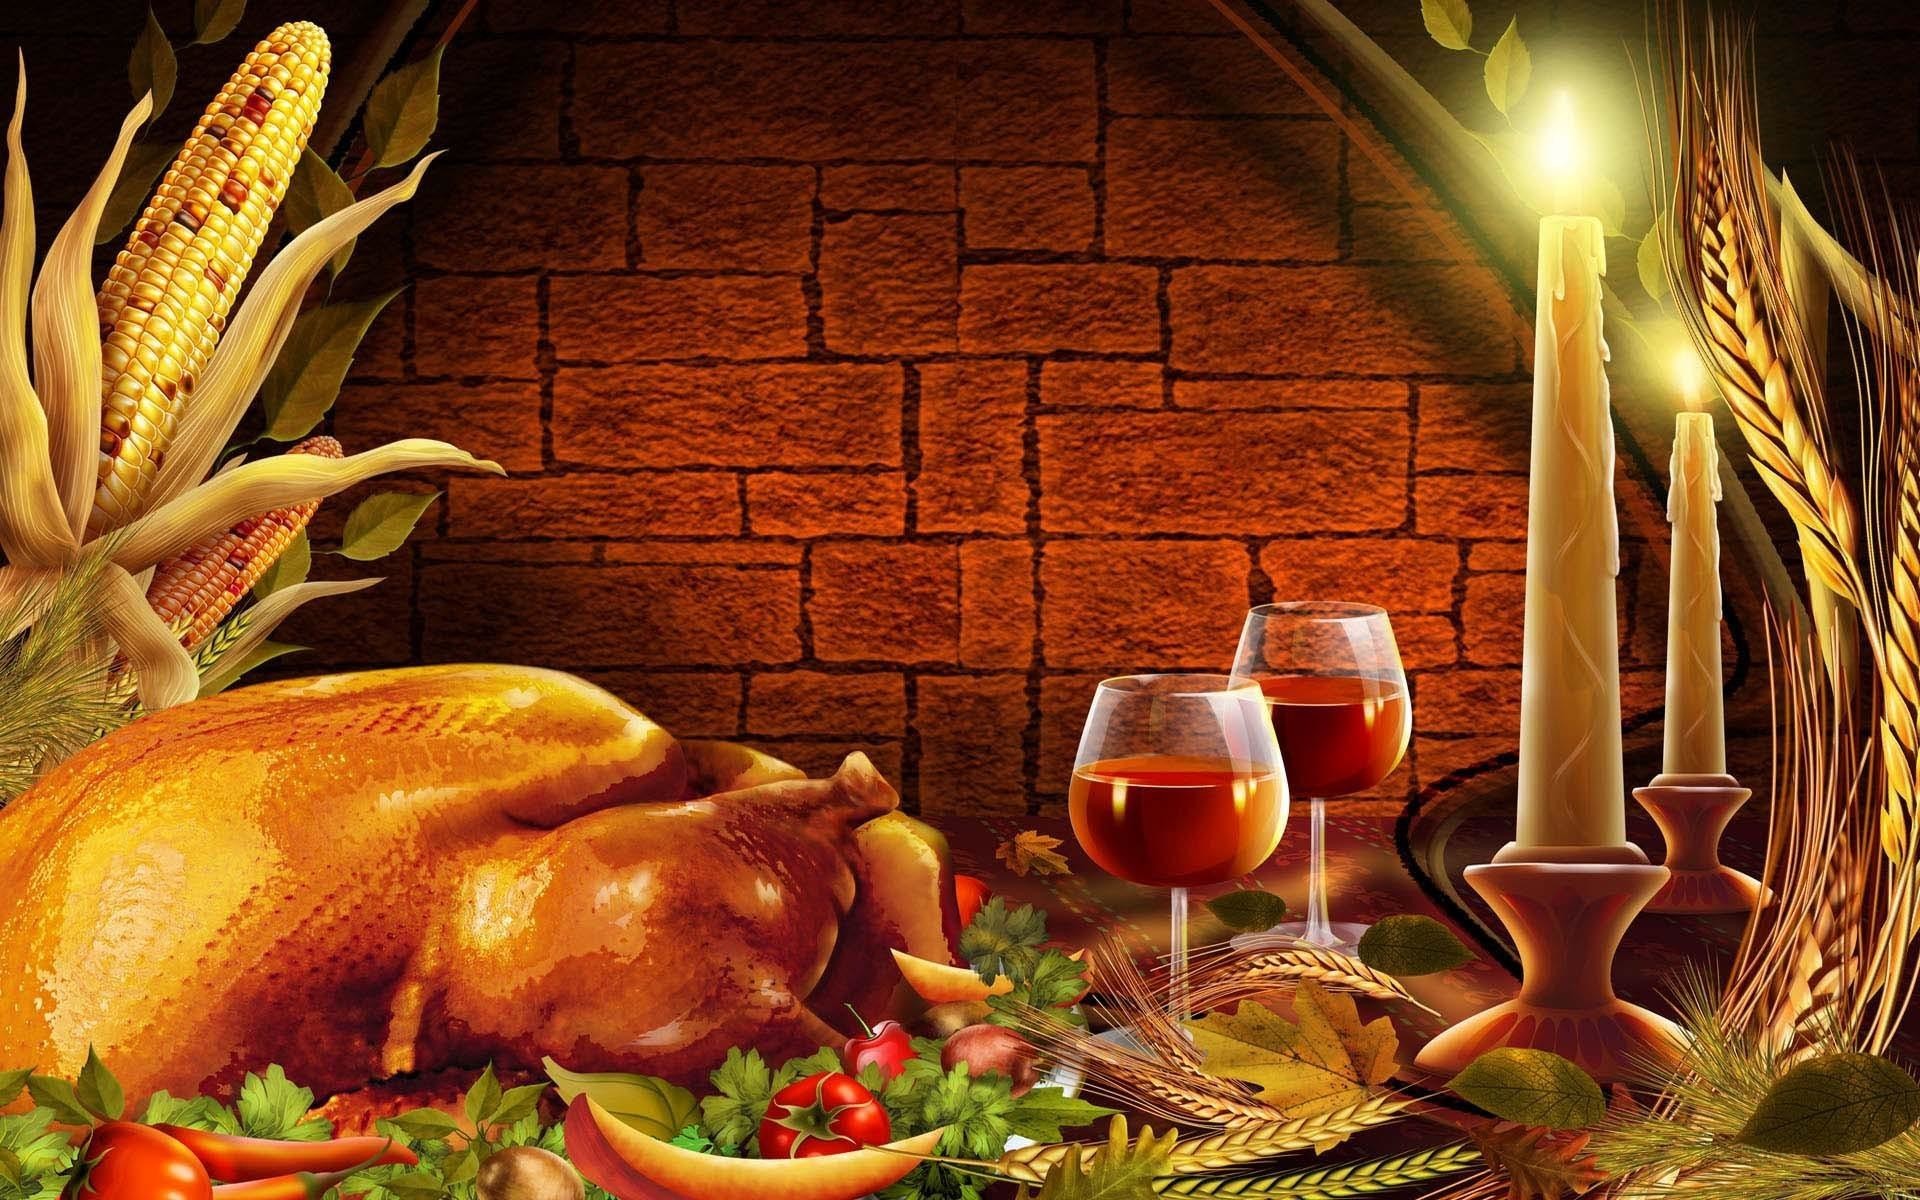 1920x1200 1920x1080 69 Thanksgiving HD Wallpapers | Backgrounds - Wallpaper Abyss